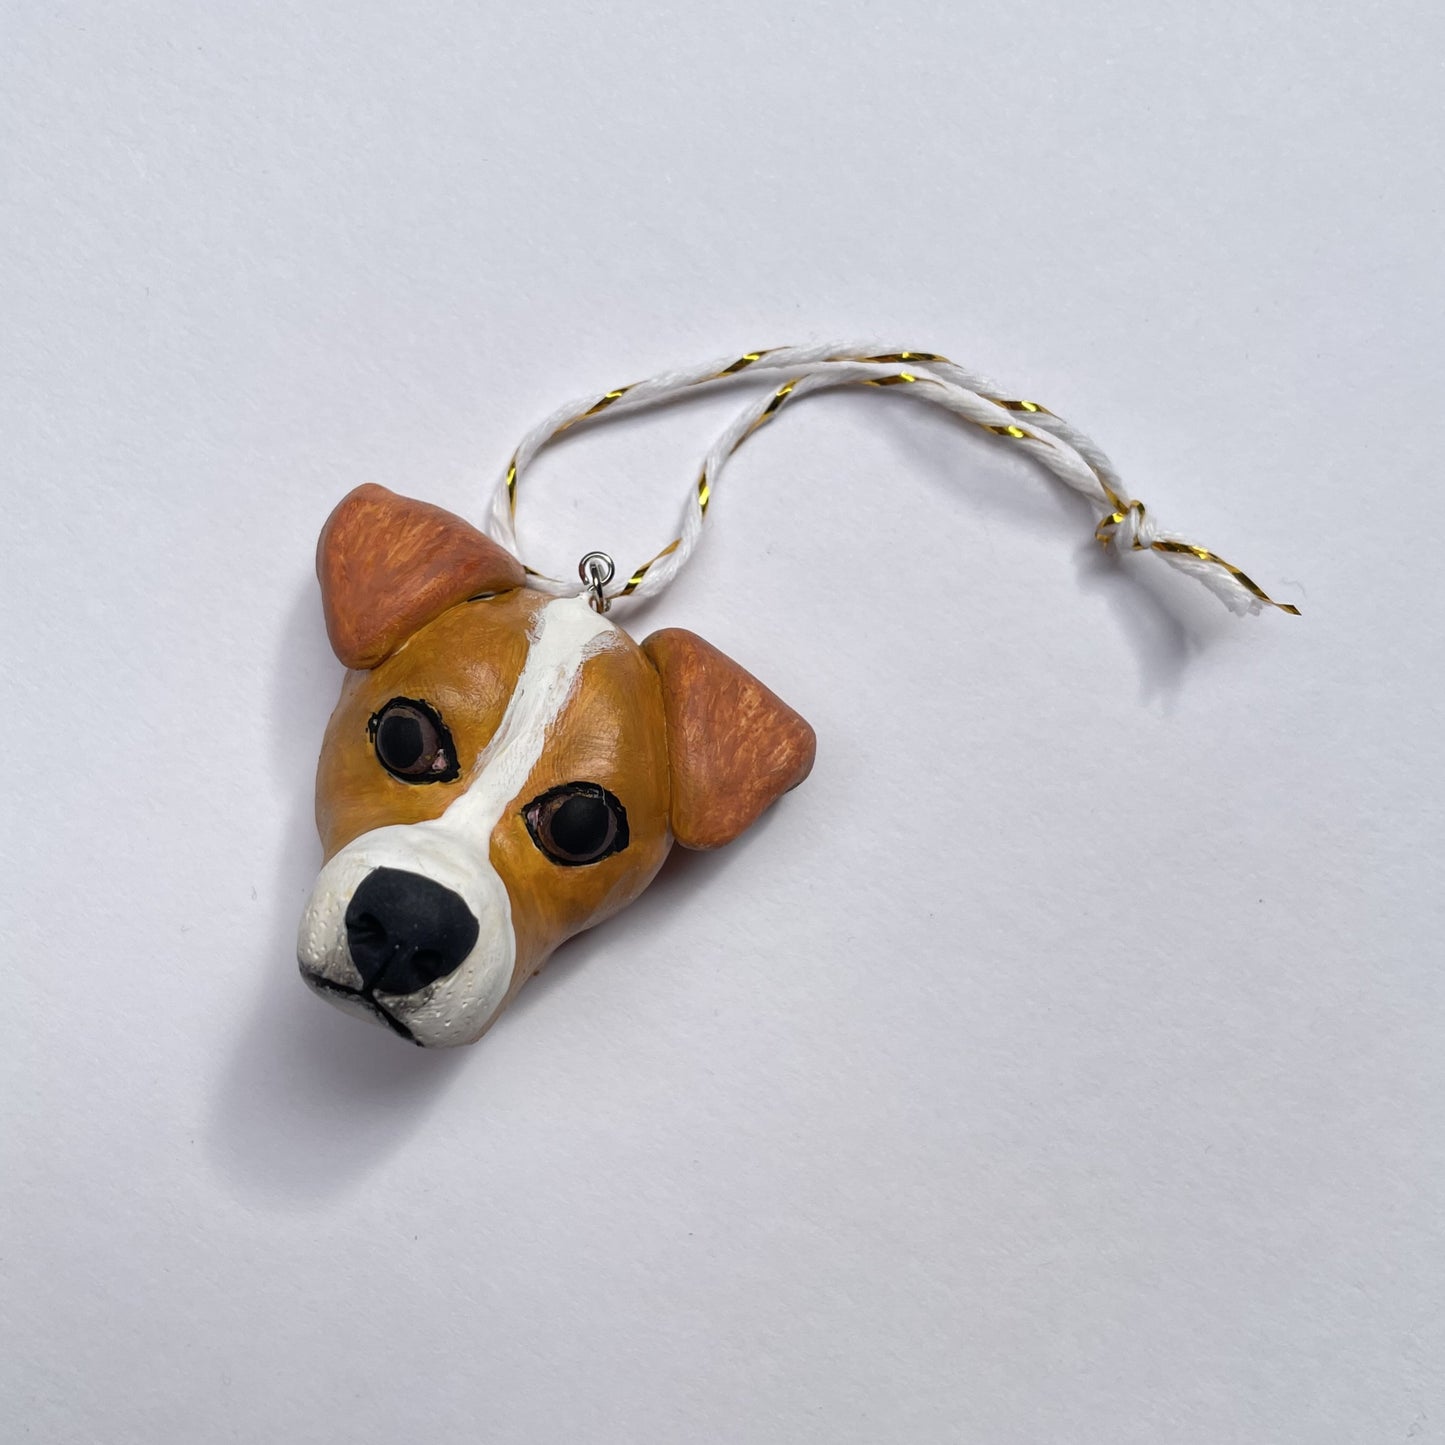 Handmade Christmas hanging ornament resembling the face of a Jack Russell.